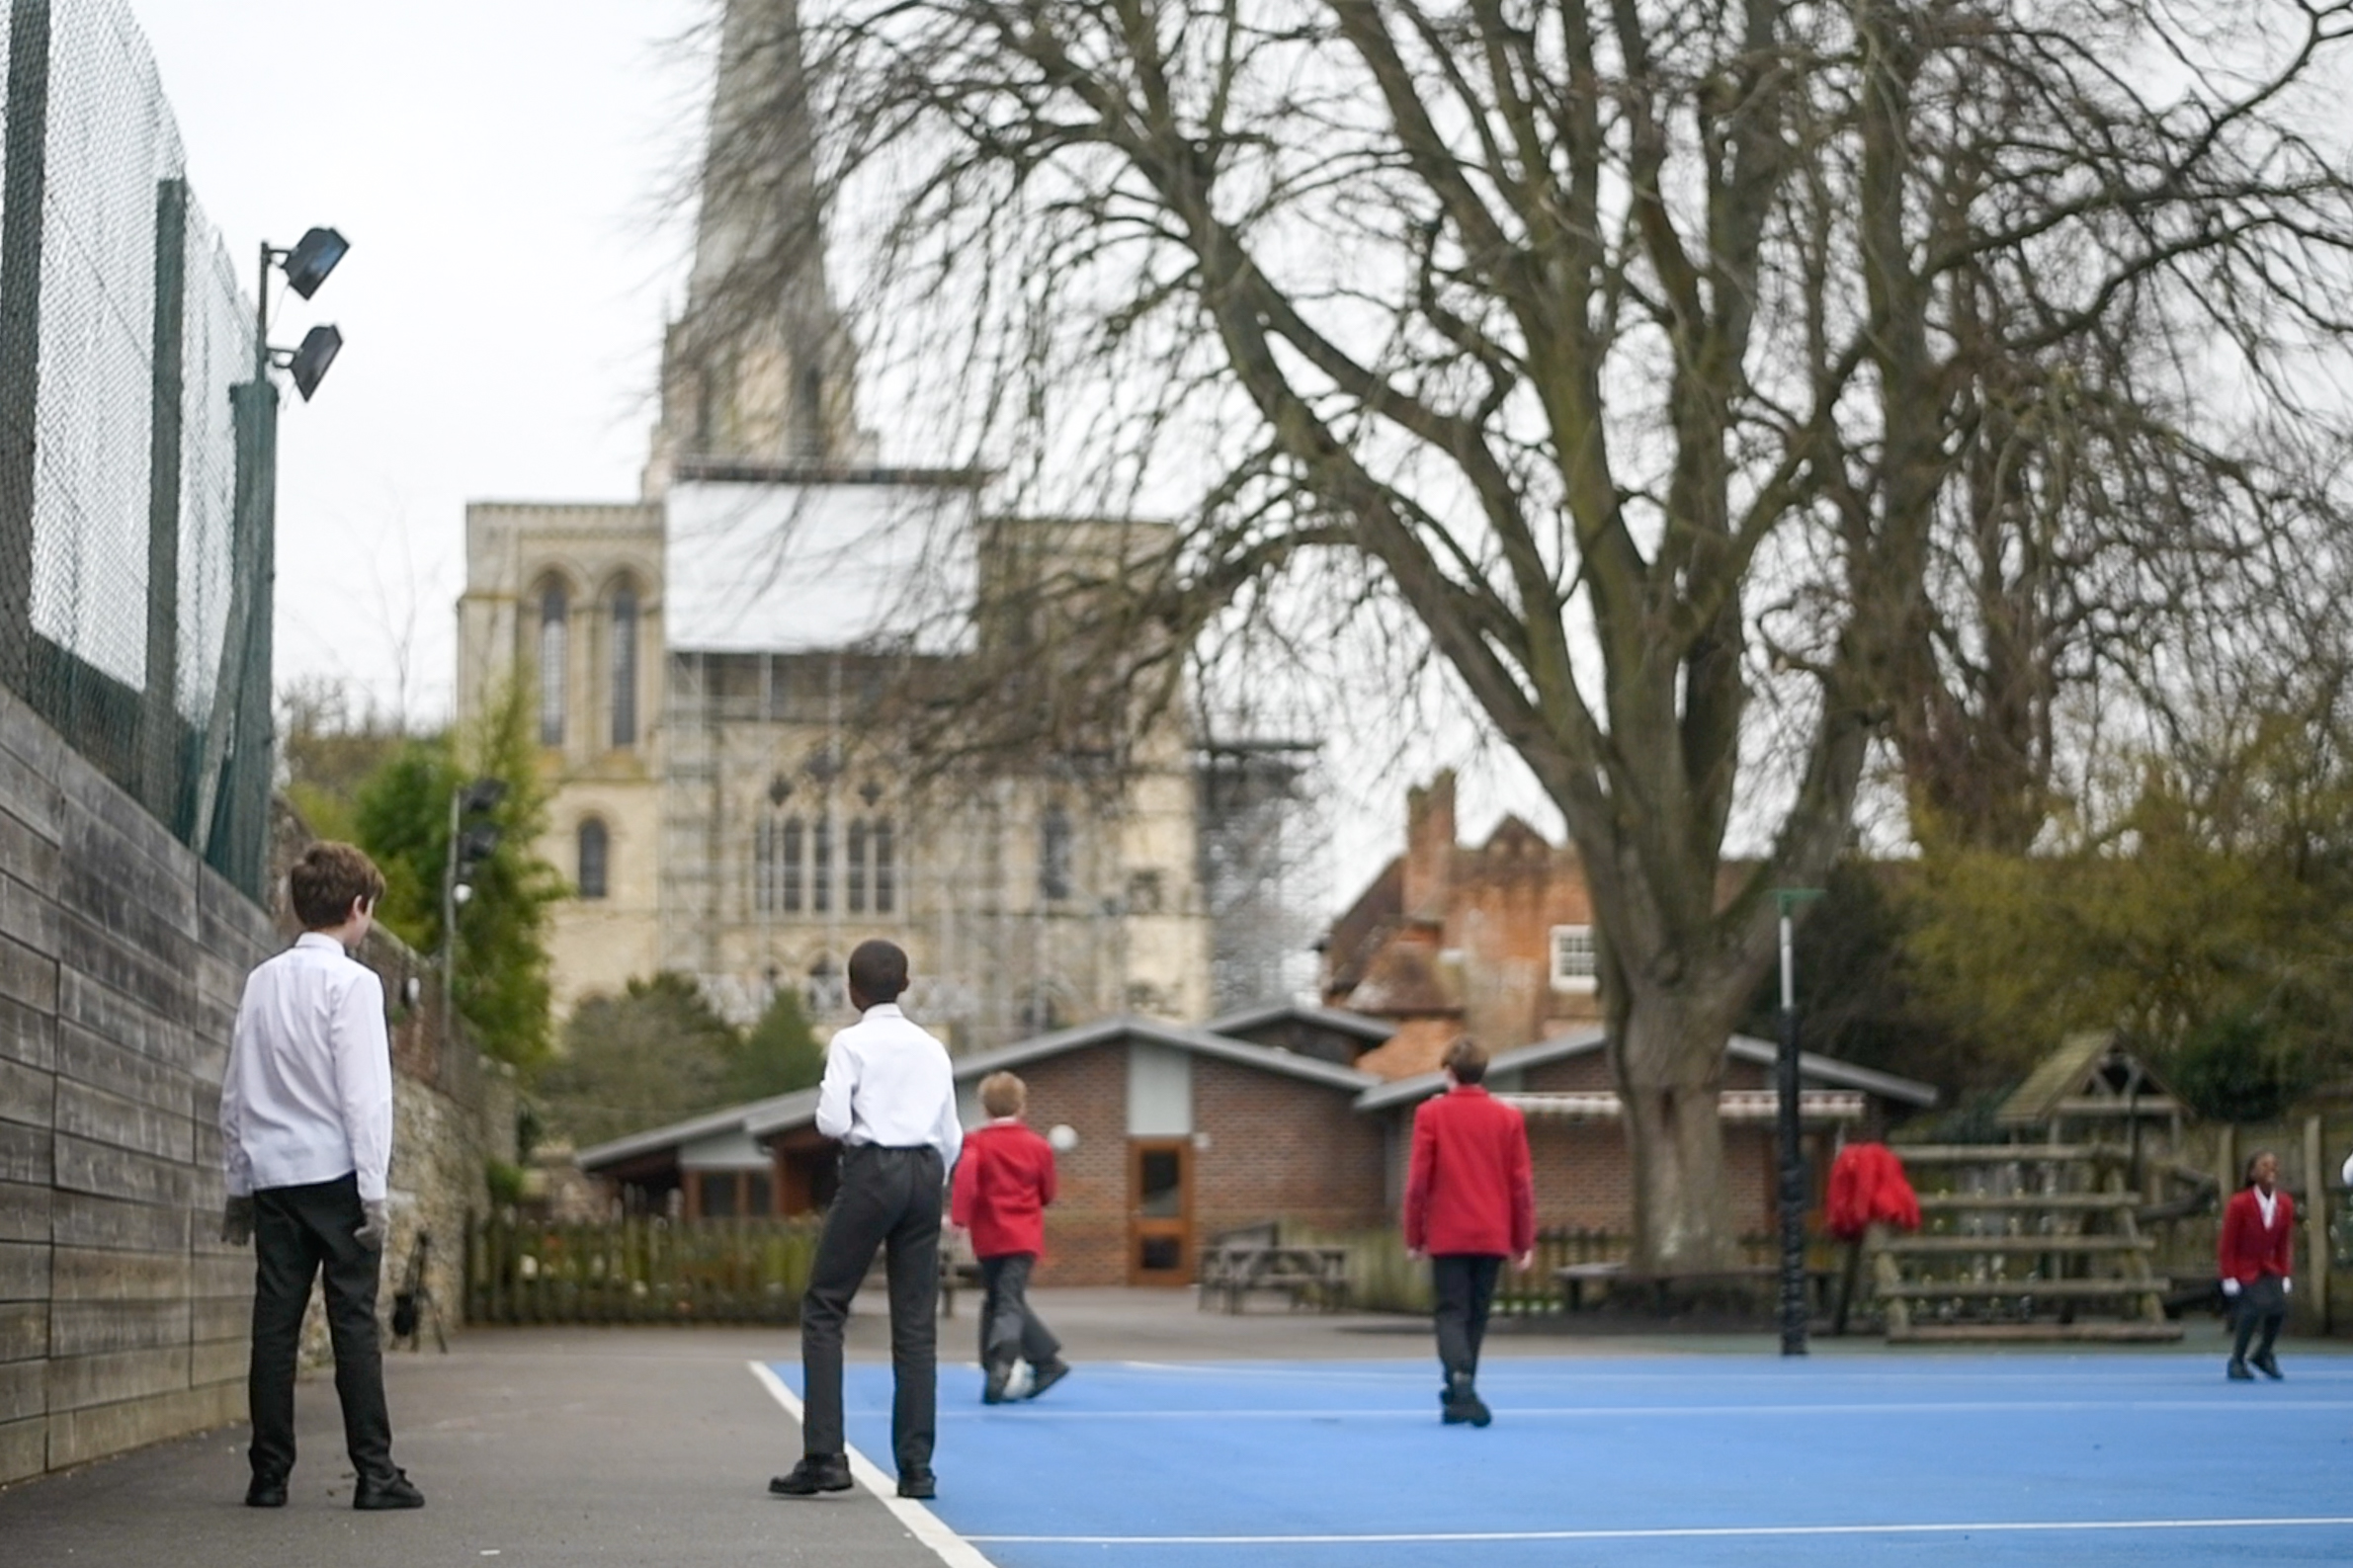 Pupils from the Prebendal School face Chichester's stone Cathedral. The pupils stand on a playground, surrounded by a fence.